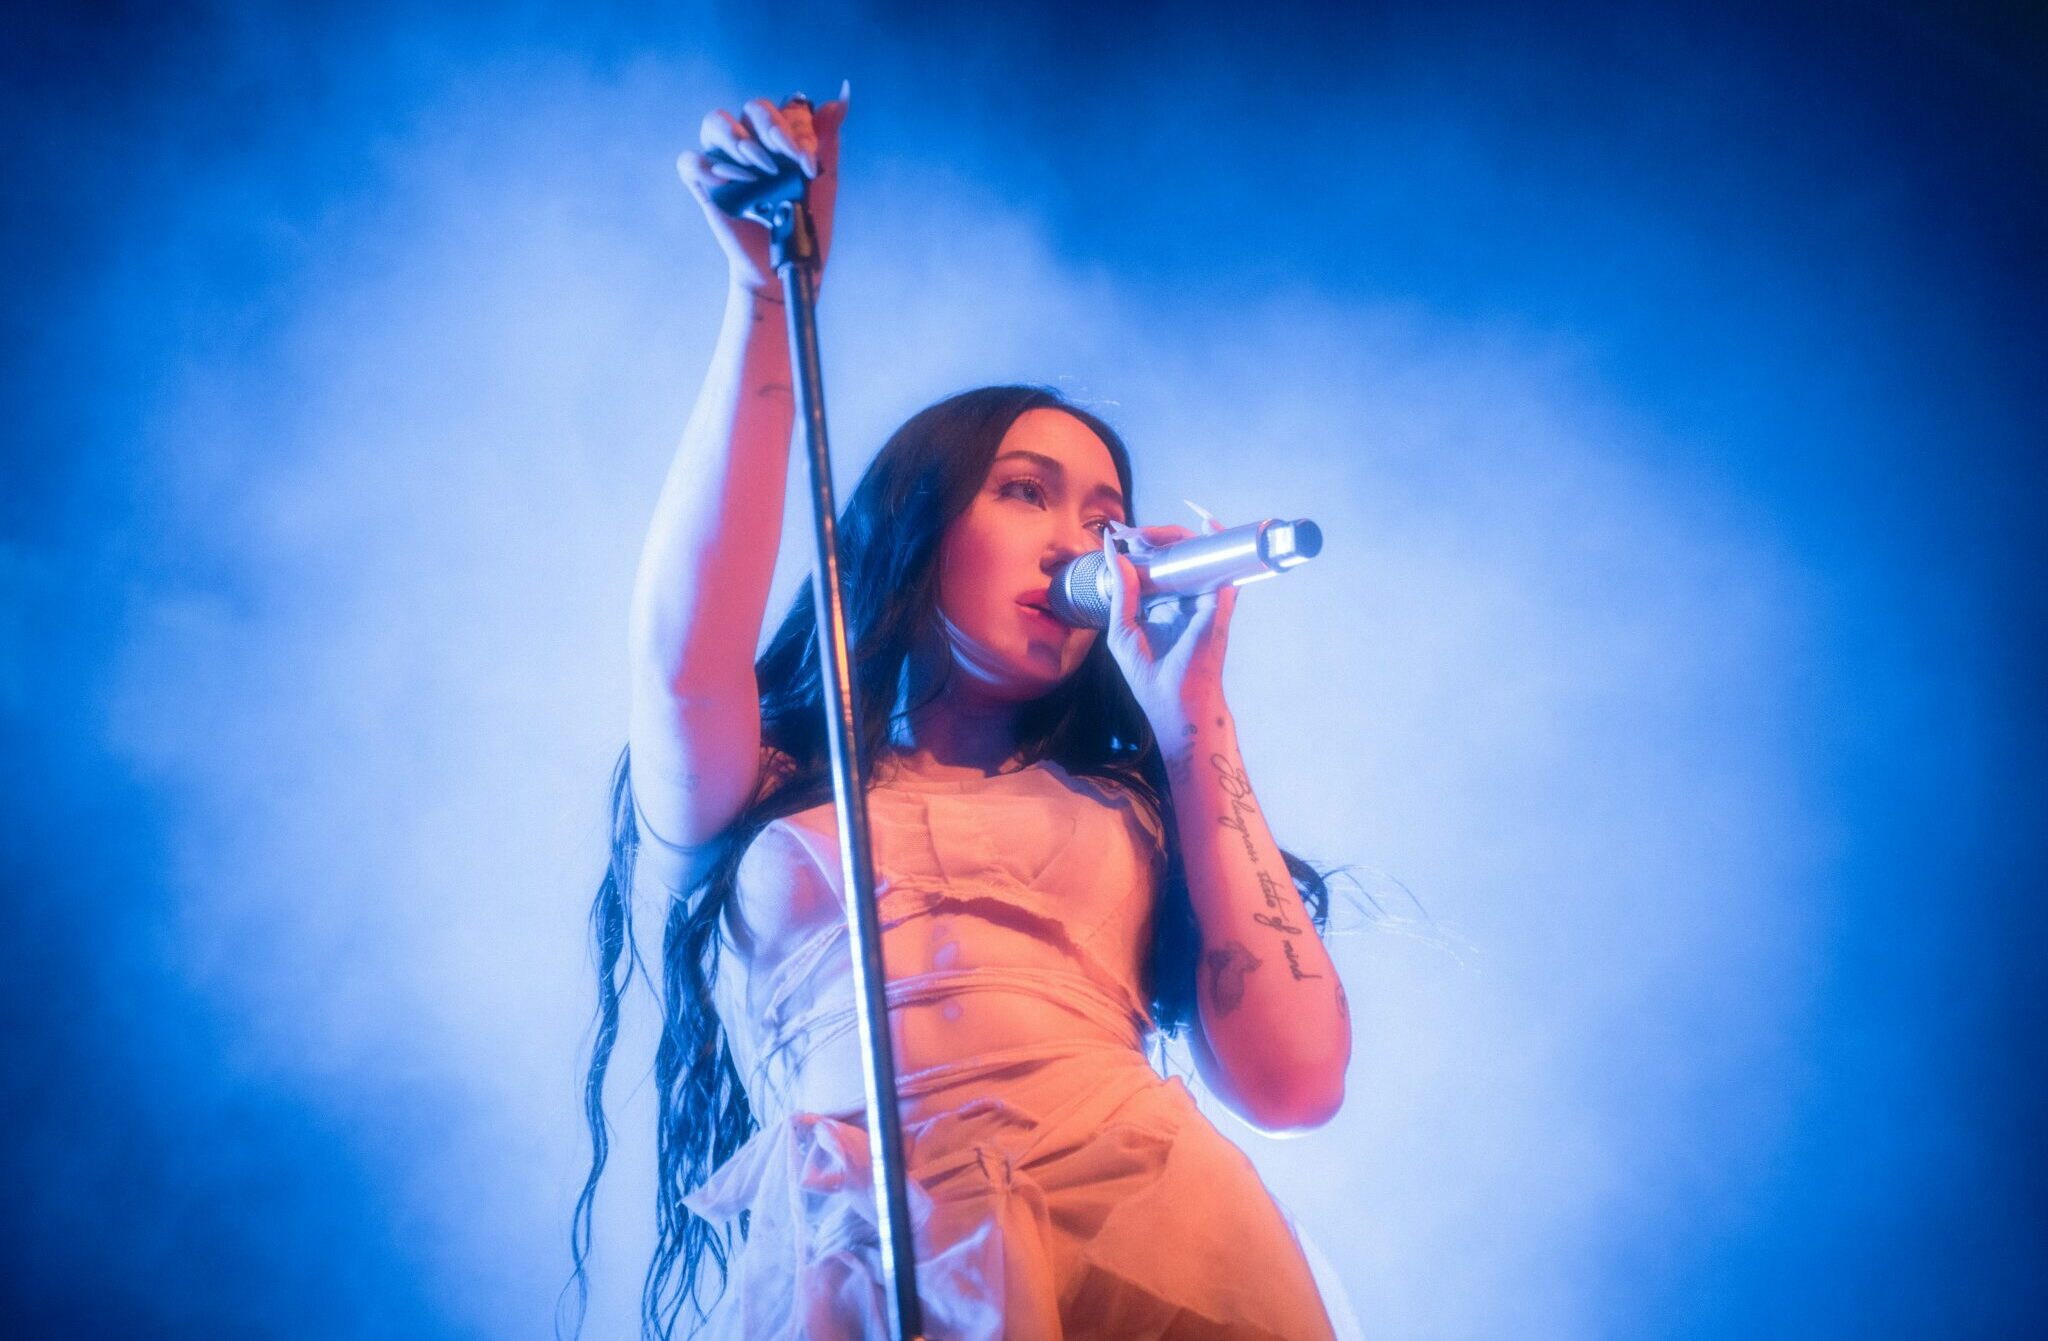 Noah Cyrus performing at Phoenix Concert Theatre in Toronto. Photo by Cassandra Popescu